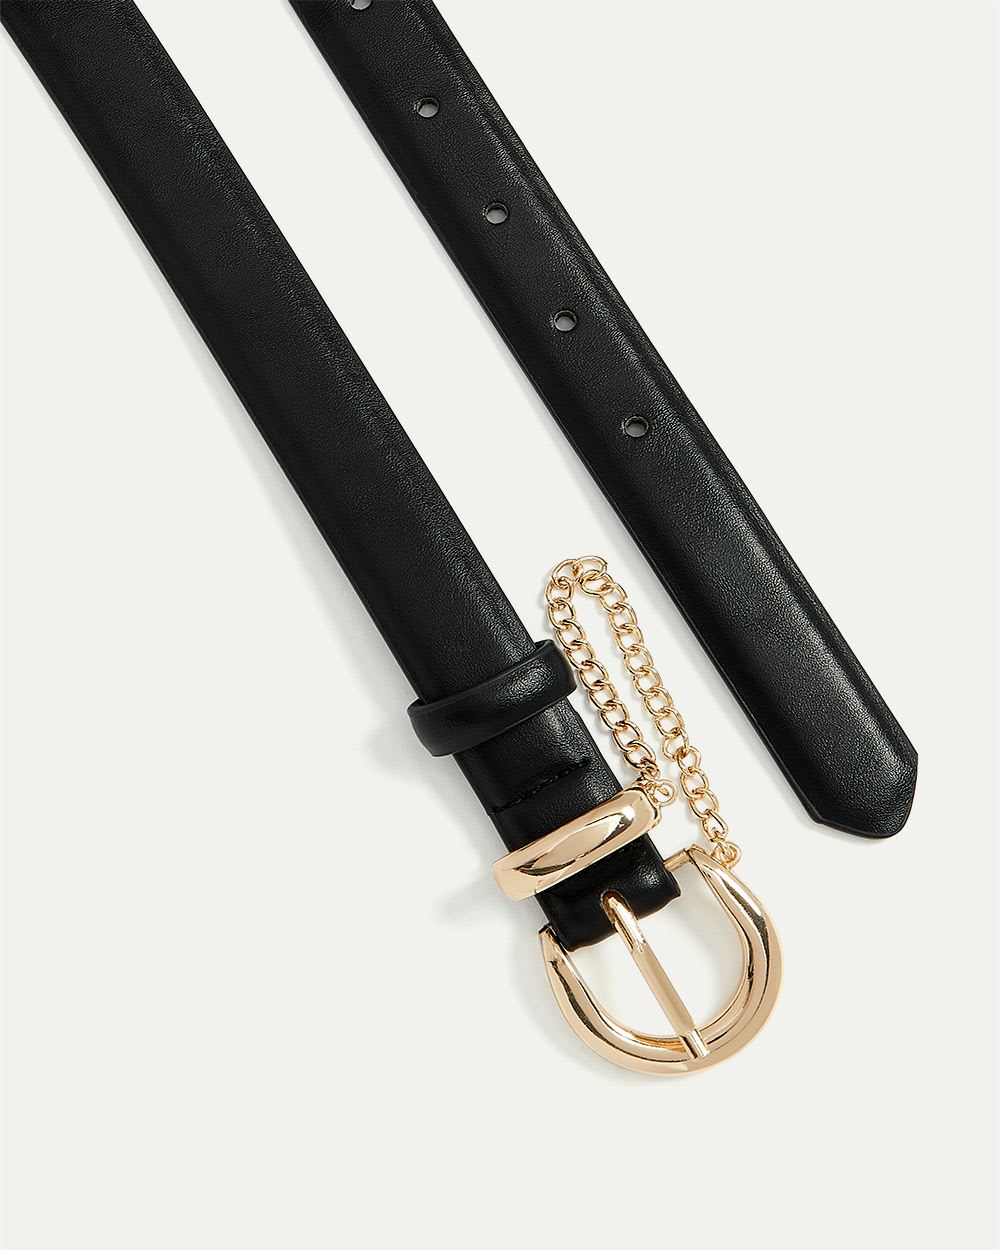 Faux Leather Belt with Hanging Chain Buckle | Regular | Reitmans